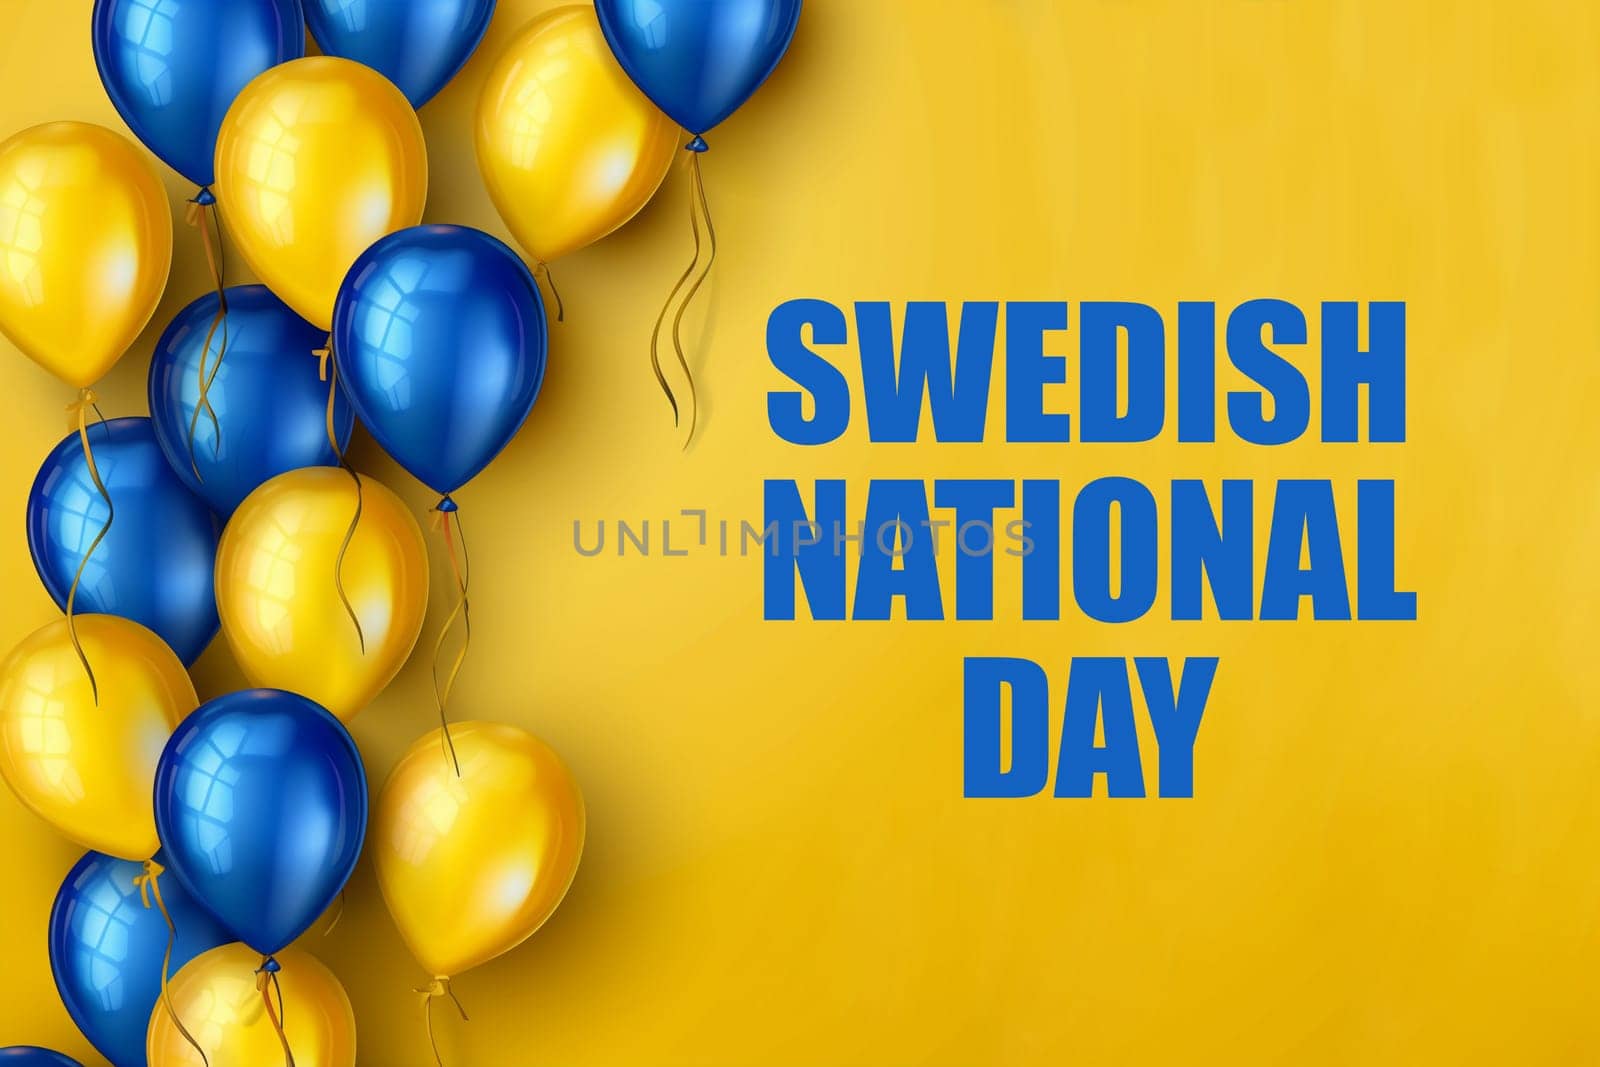 Celebrating Swedish National Day With Blue and Yellow Balloons by Sd28DimoN_1976